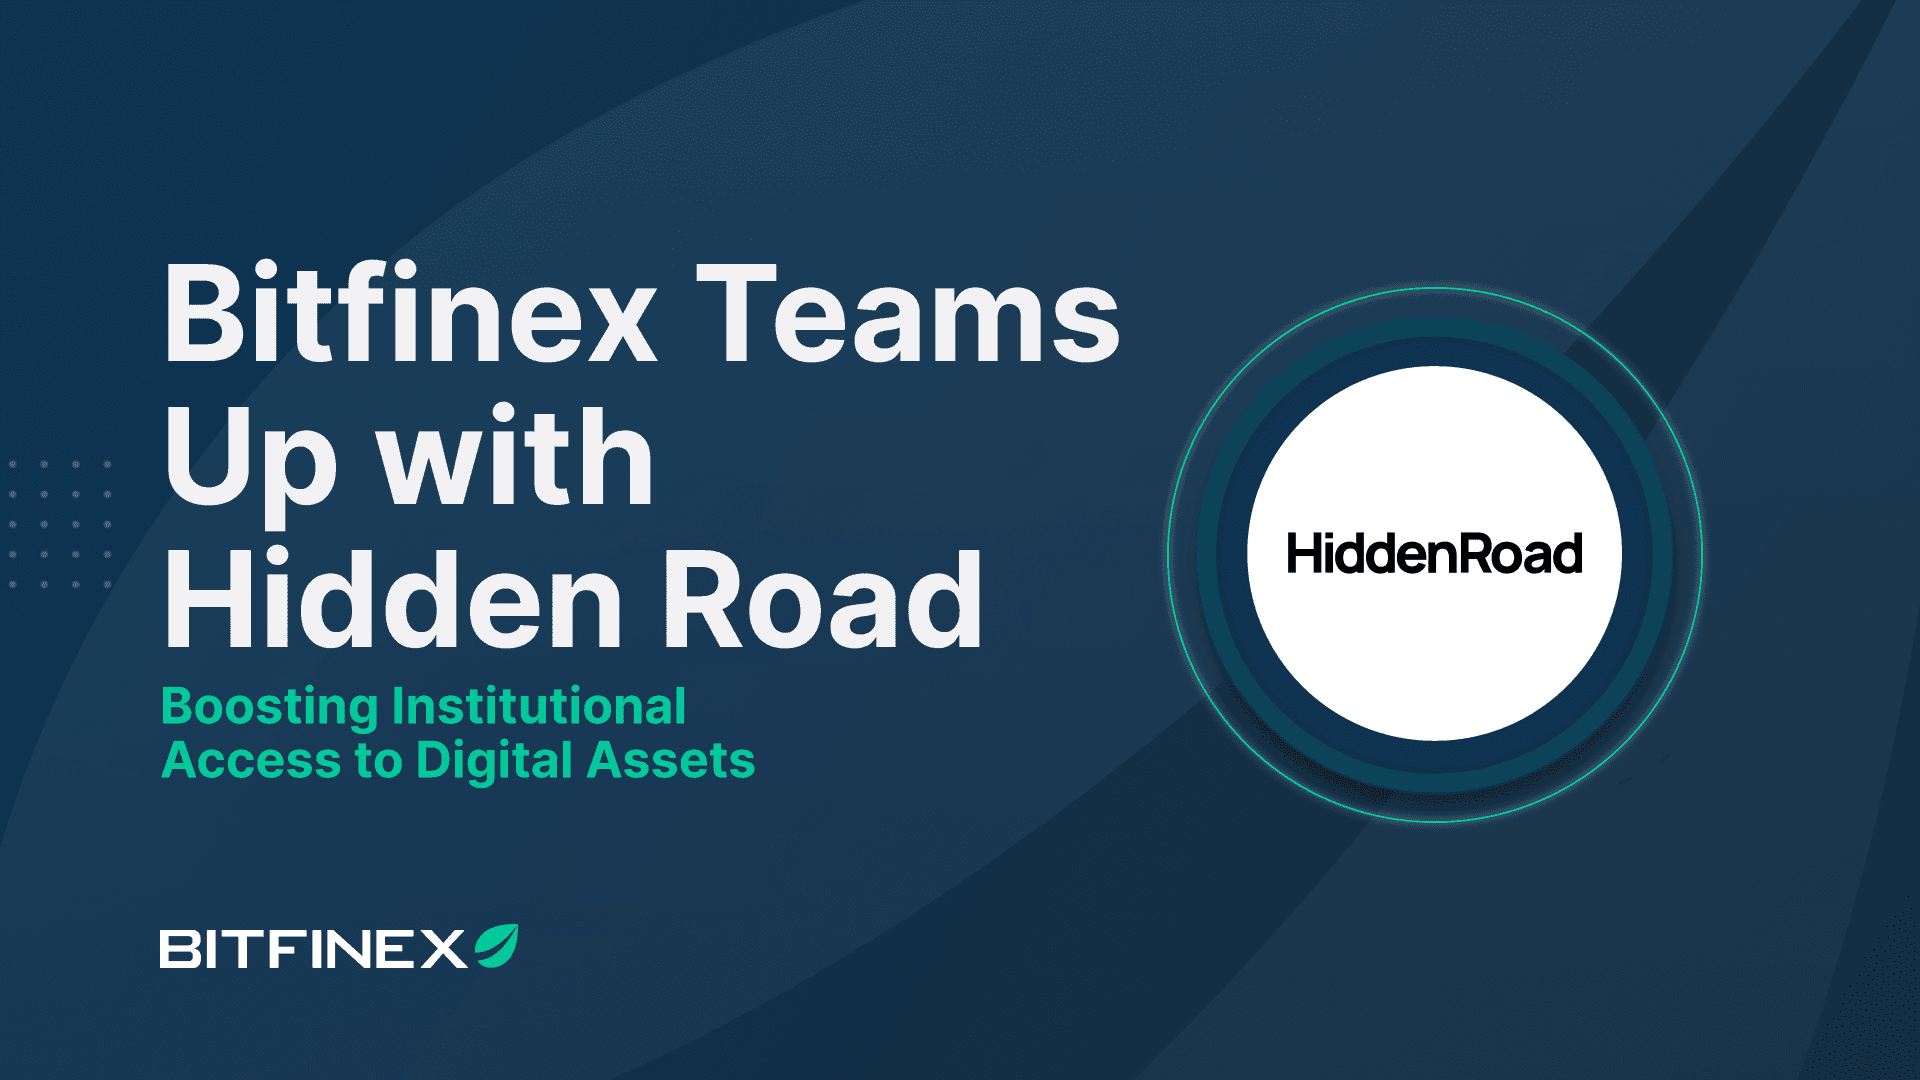 Bitfinex Teams Up with Hidden Road, Boosting Institutional Access to Digital Assets